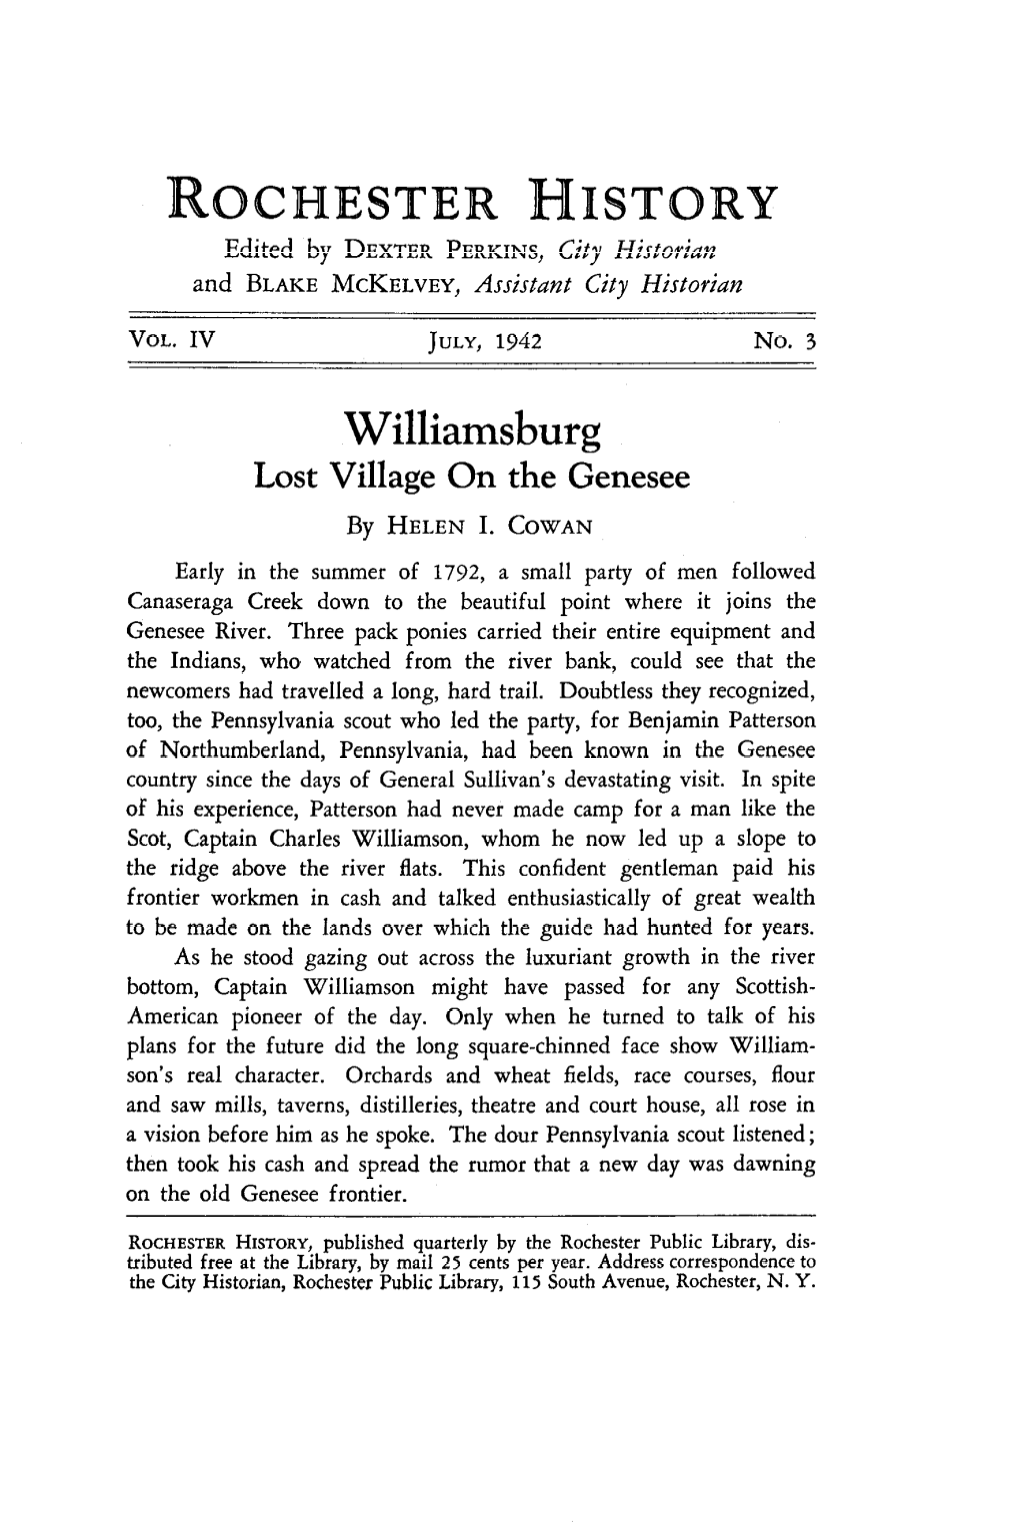 Williamsburg Lost Village on the Genesee by HELEN I